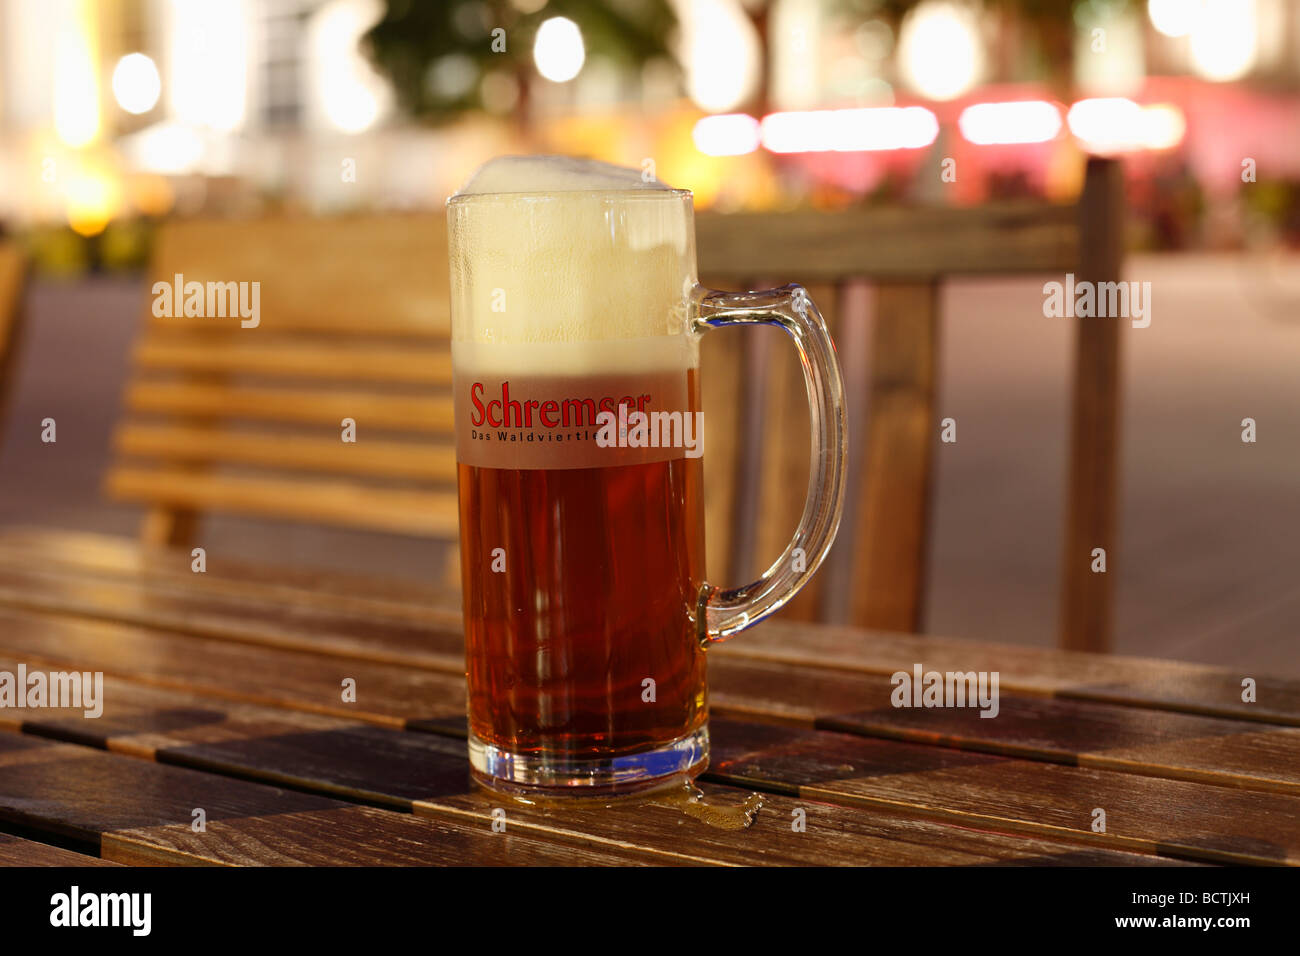 Schremser beer in a beer glass, Museumsquartier district, Vienna, Austria, Europe Stock Photo